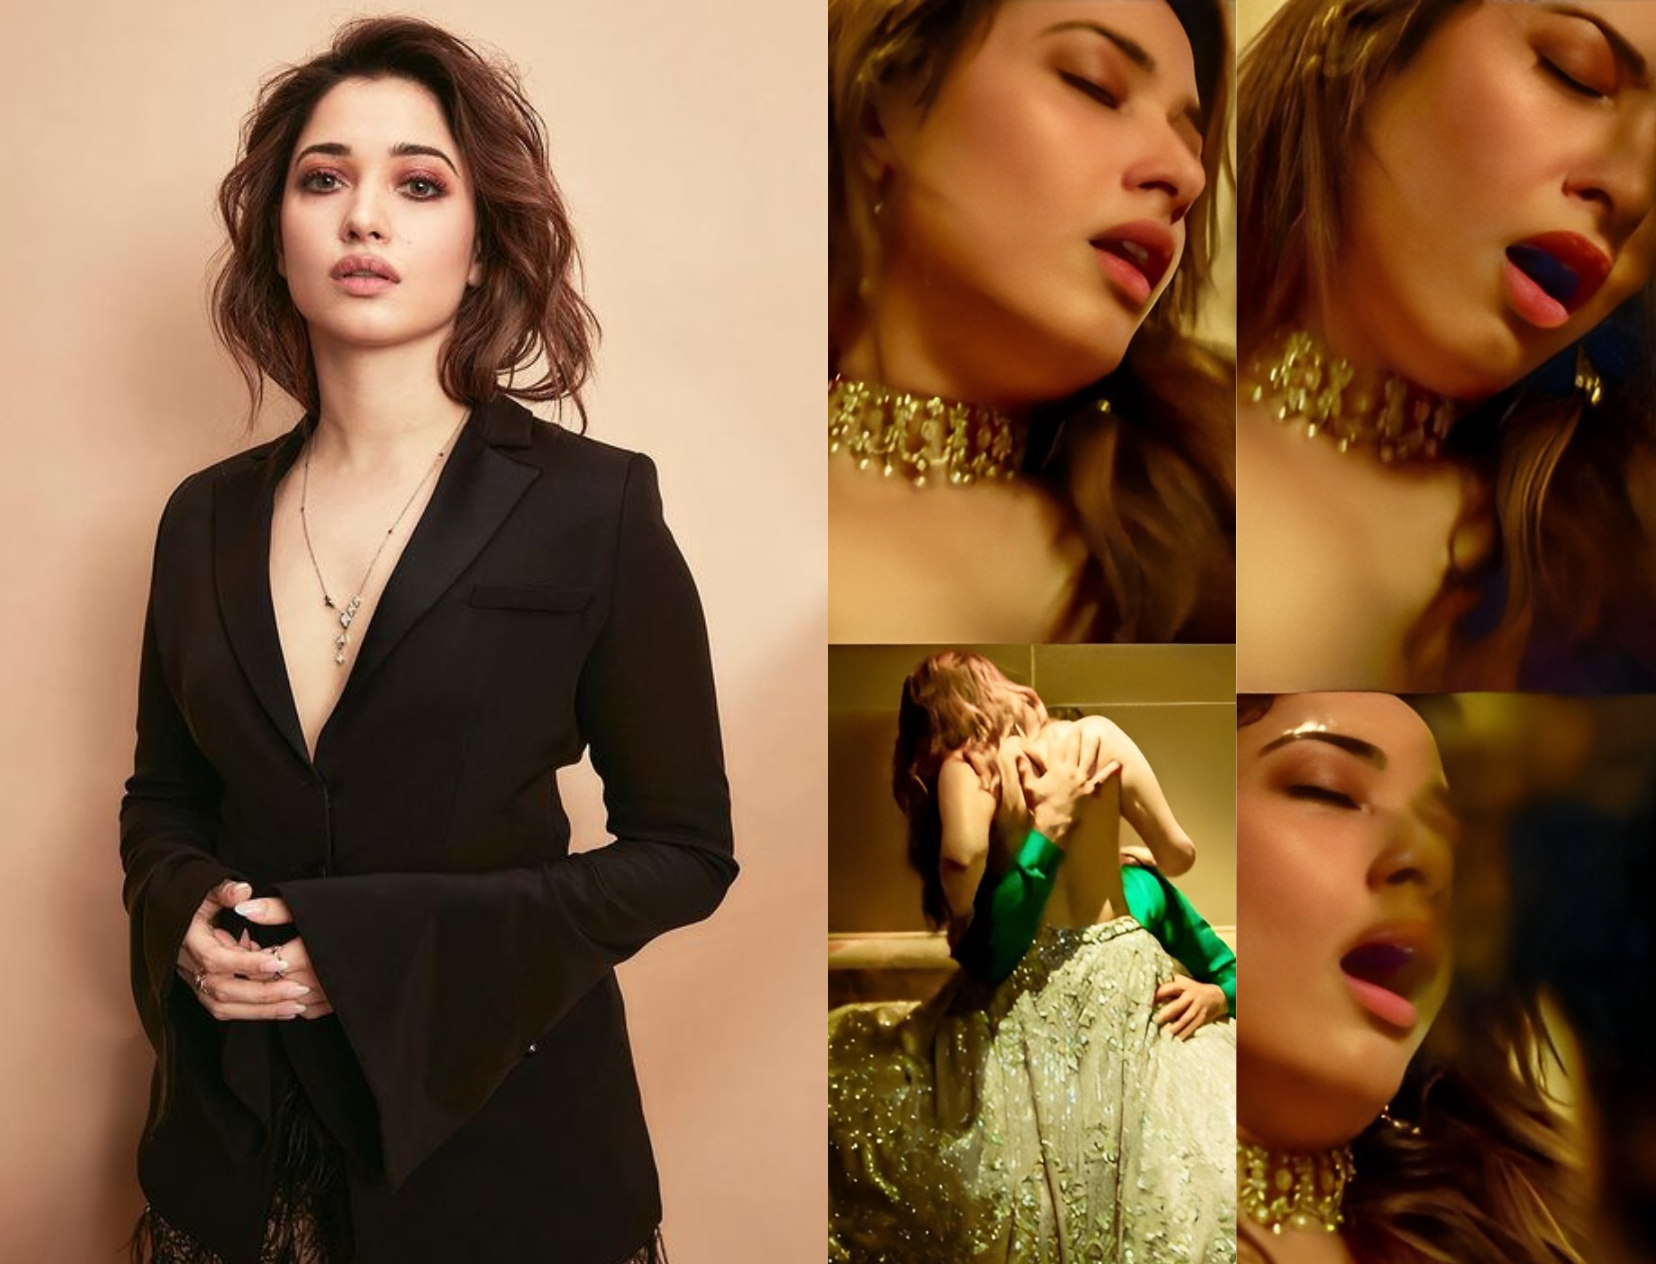 Tamannaah Bhatia Gets Slammed For Going Topless In Jee Karda and We Are Confused pic